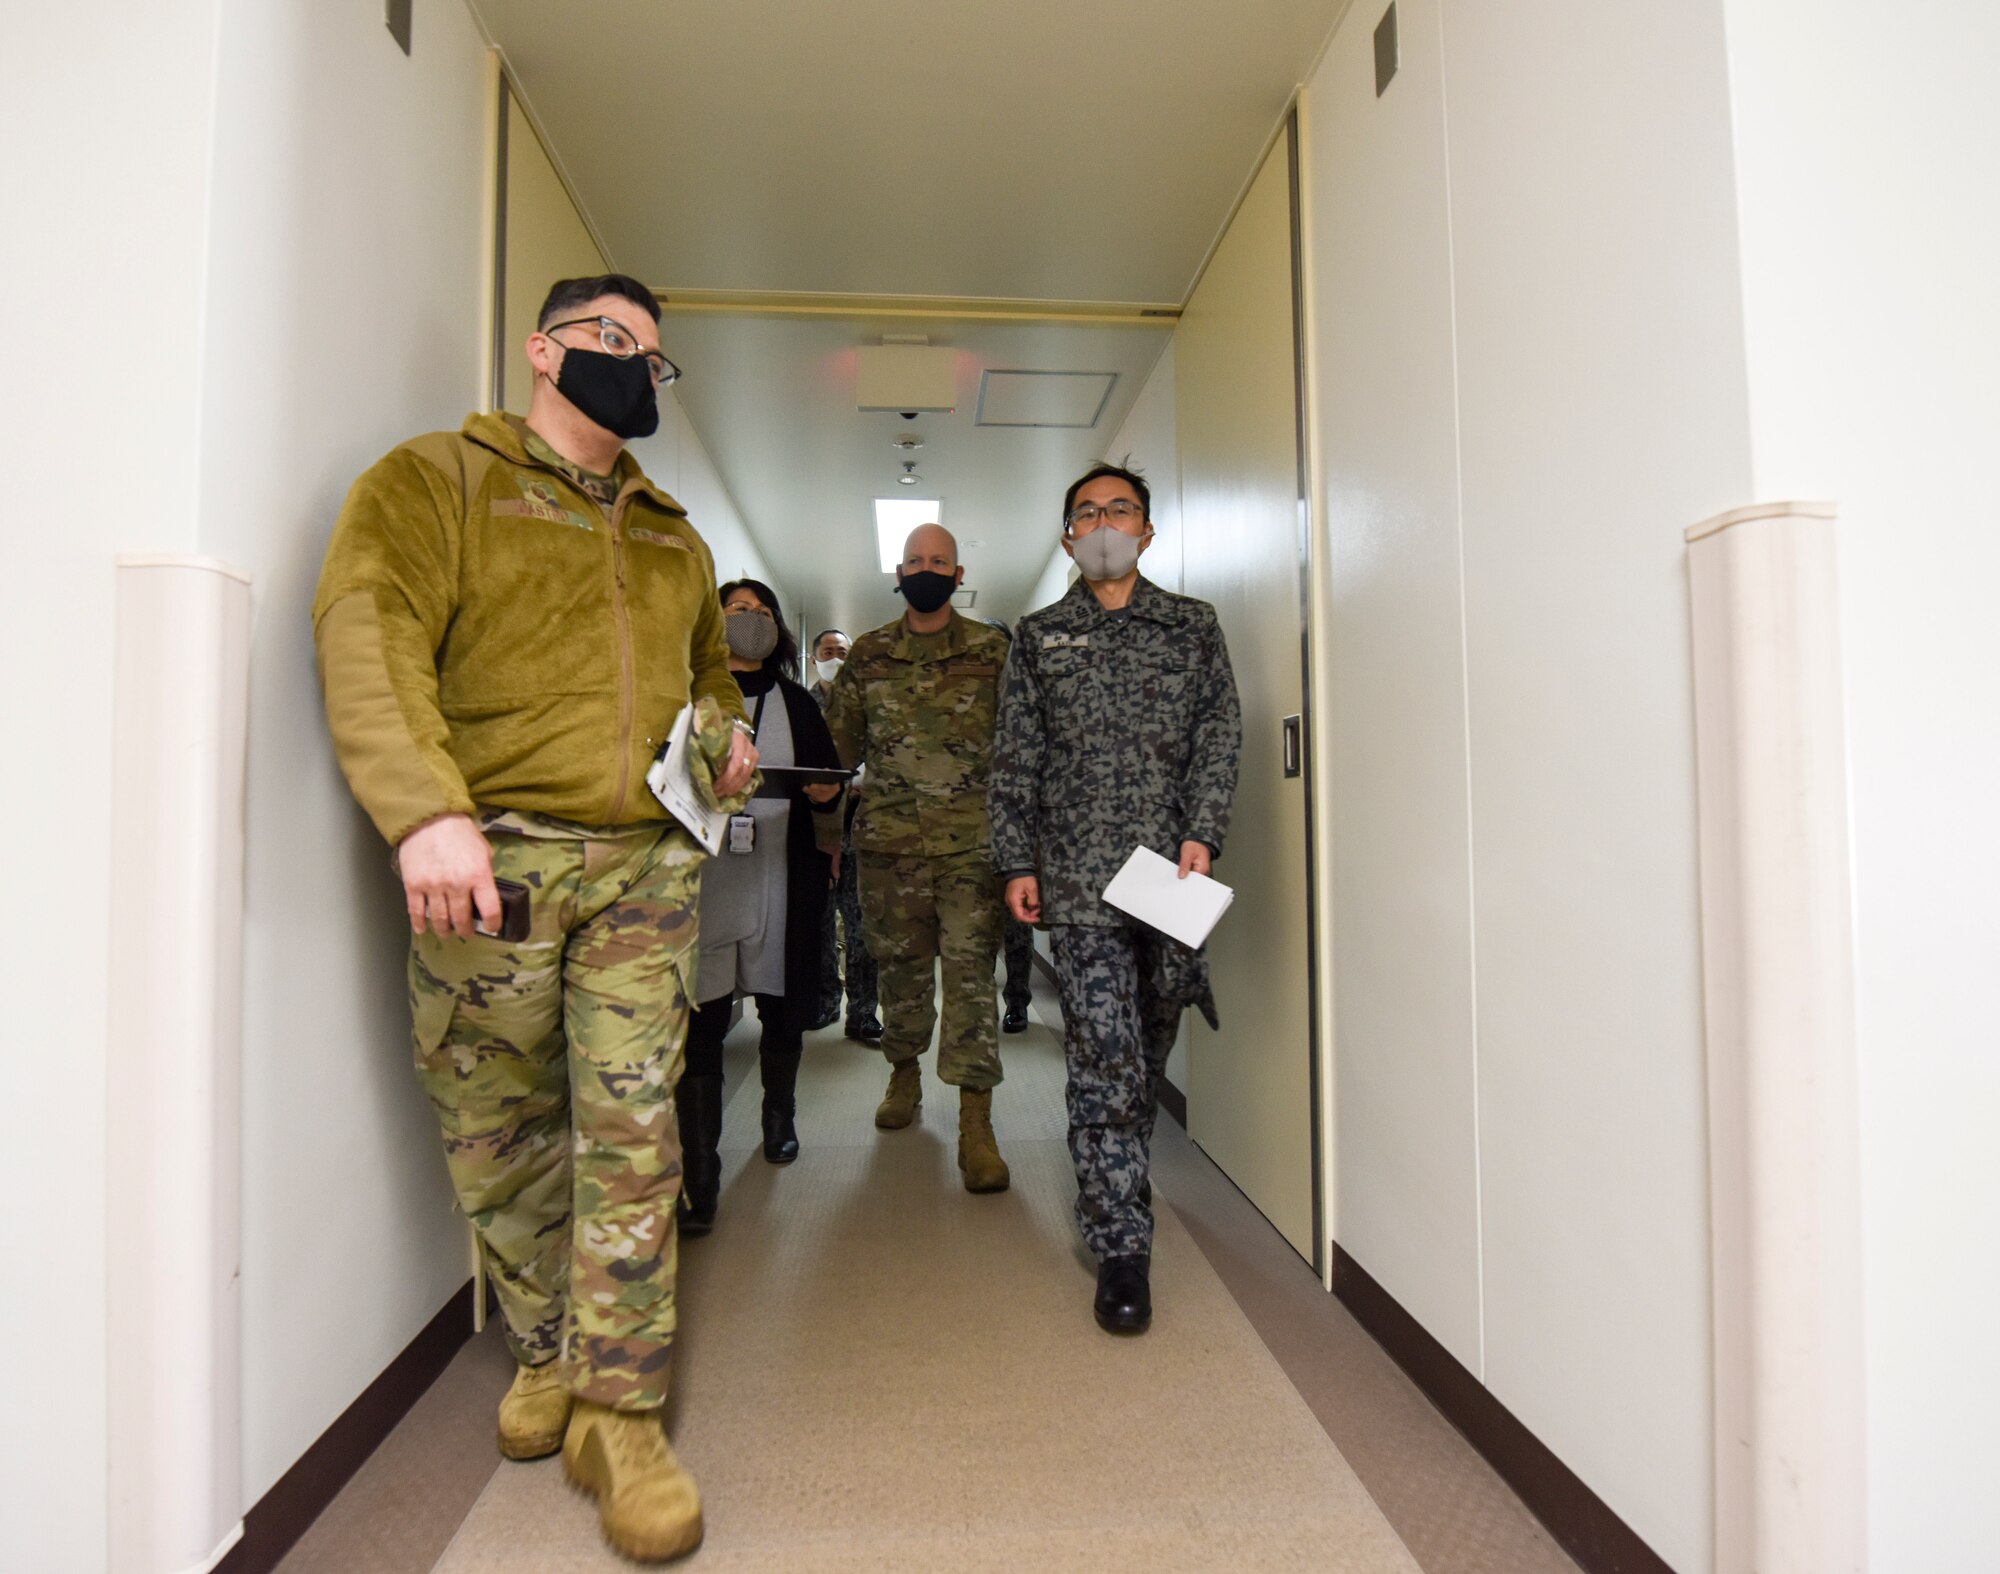 U.S. Air Force Master Sgt. William Castro, left, 35th Civil Engineer Squadron Unaccompanied Housing superintendent, leads a tour of the 35th Fighter Wing Unaccompanied Housing dormitory campus at Misawa Air Base, Japan, Feb. 26, 2021. As they are in the process of upgrading their unaccompanied housing living quarters, the Japan Air Self-Defense Force leaders from the 3rd Air Wing took the tour to gain some perspective on how the 35th Fighter Wing manages its dormitory campus. (U.S. Air Force photo by Tech. Sgt. Timothy Moore)